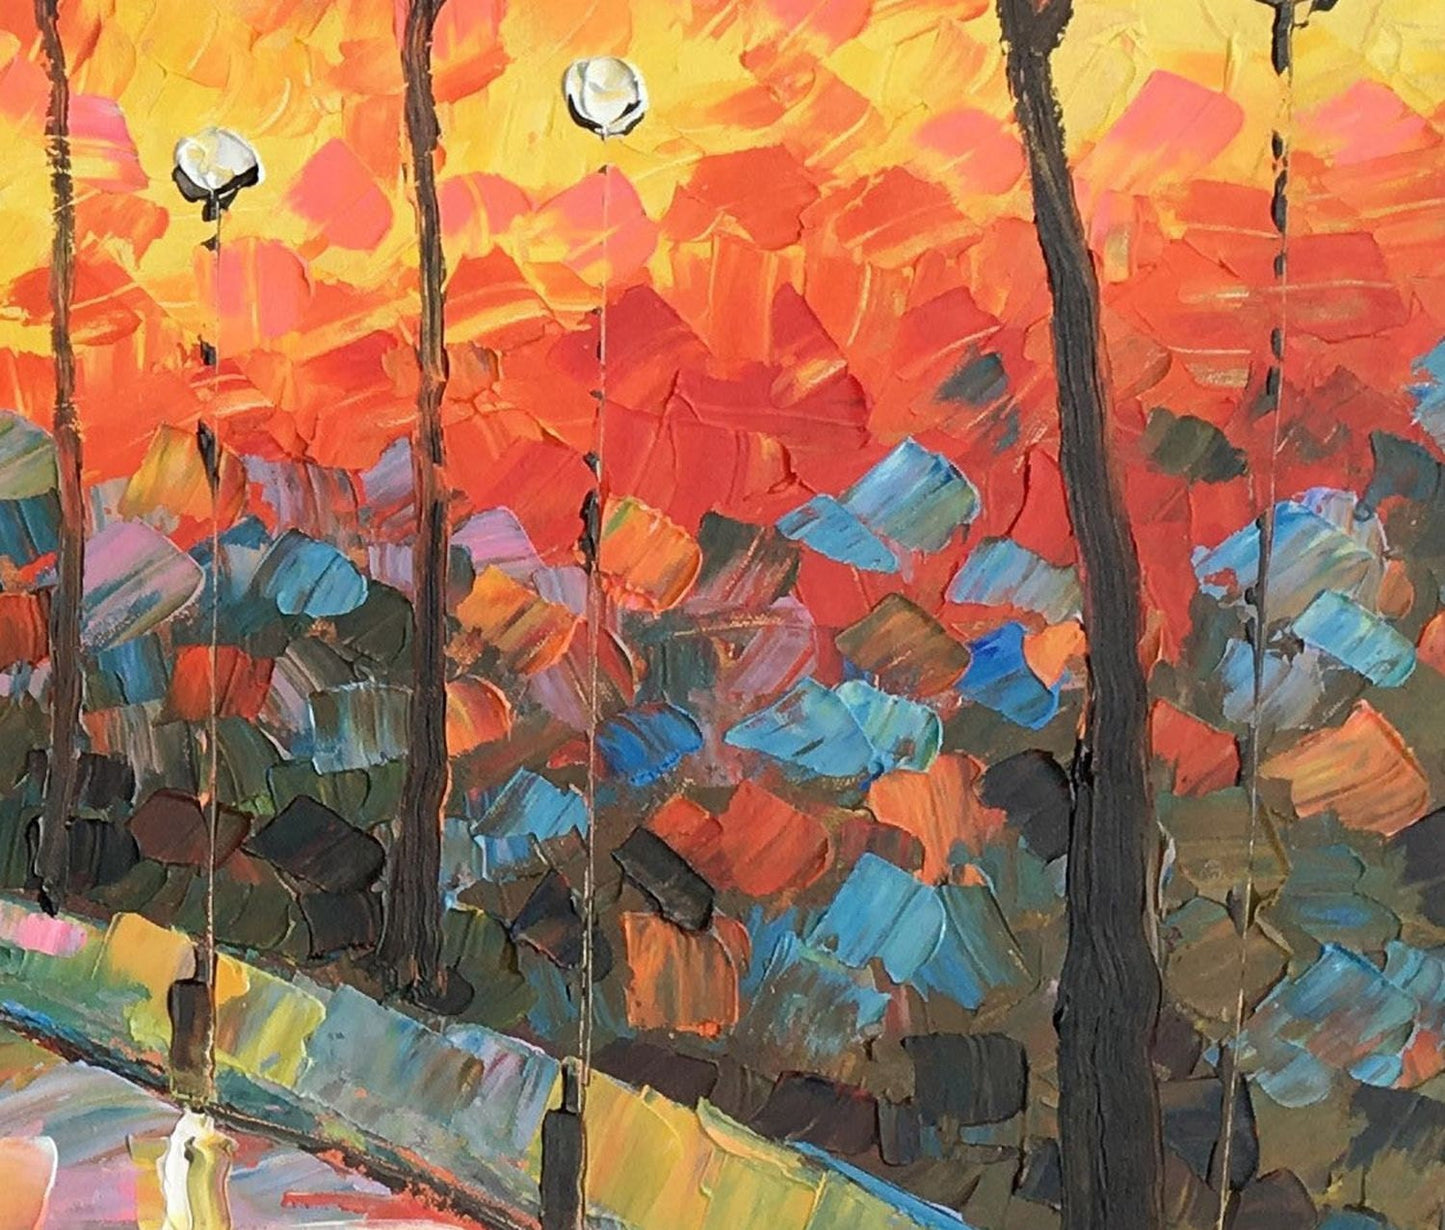 Transform your space with breathtaking Landscape Painting - Autumn Night, An Original Oil Painting by George Miller